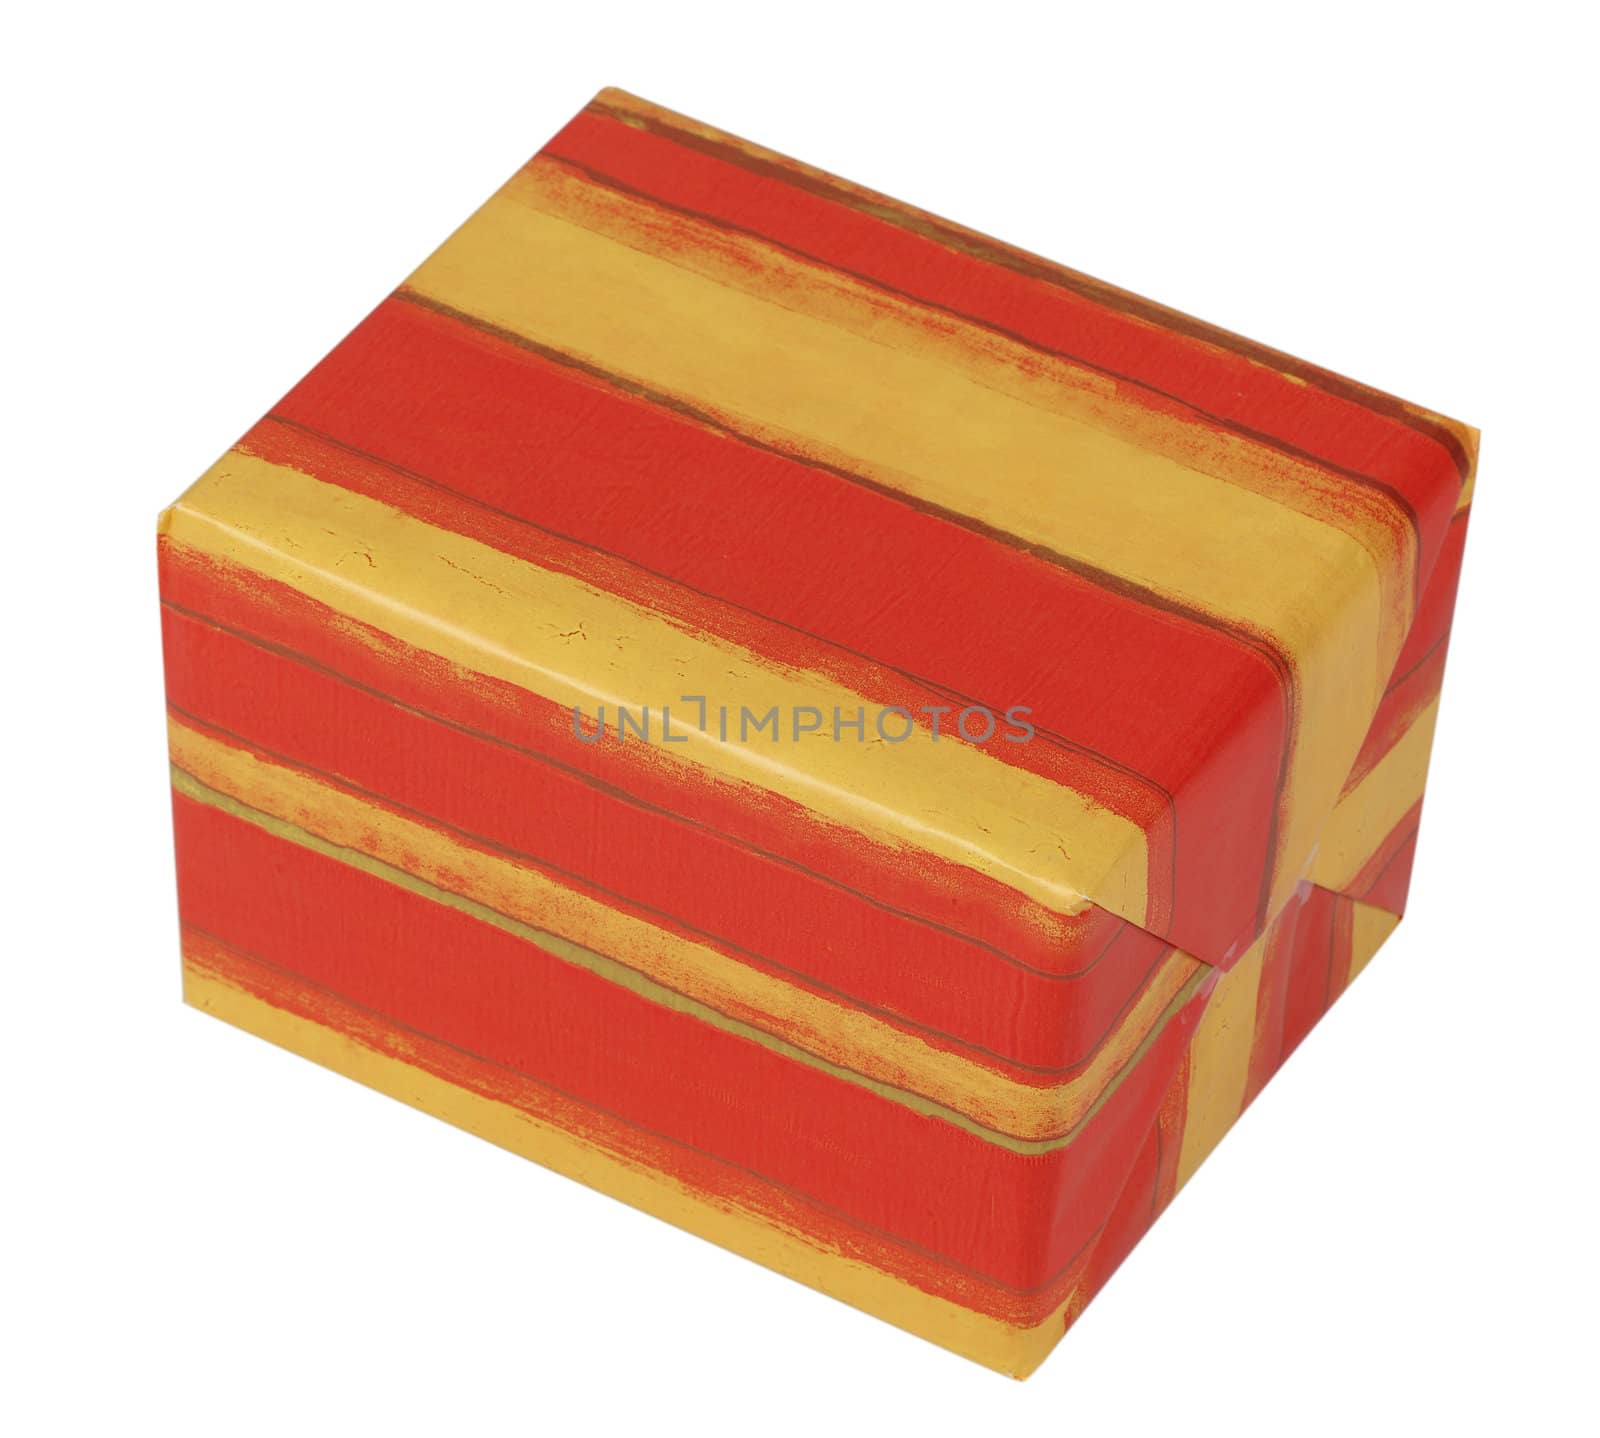 Gisft box isolated against a white background with clipping path included in the file.